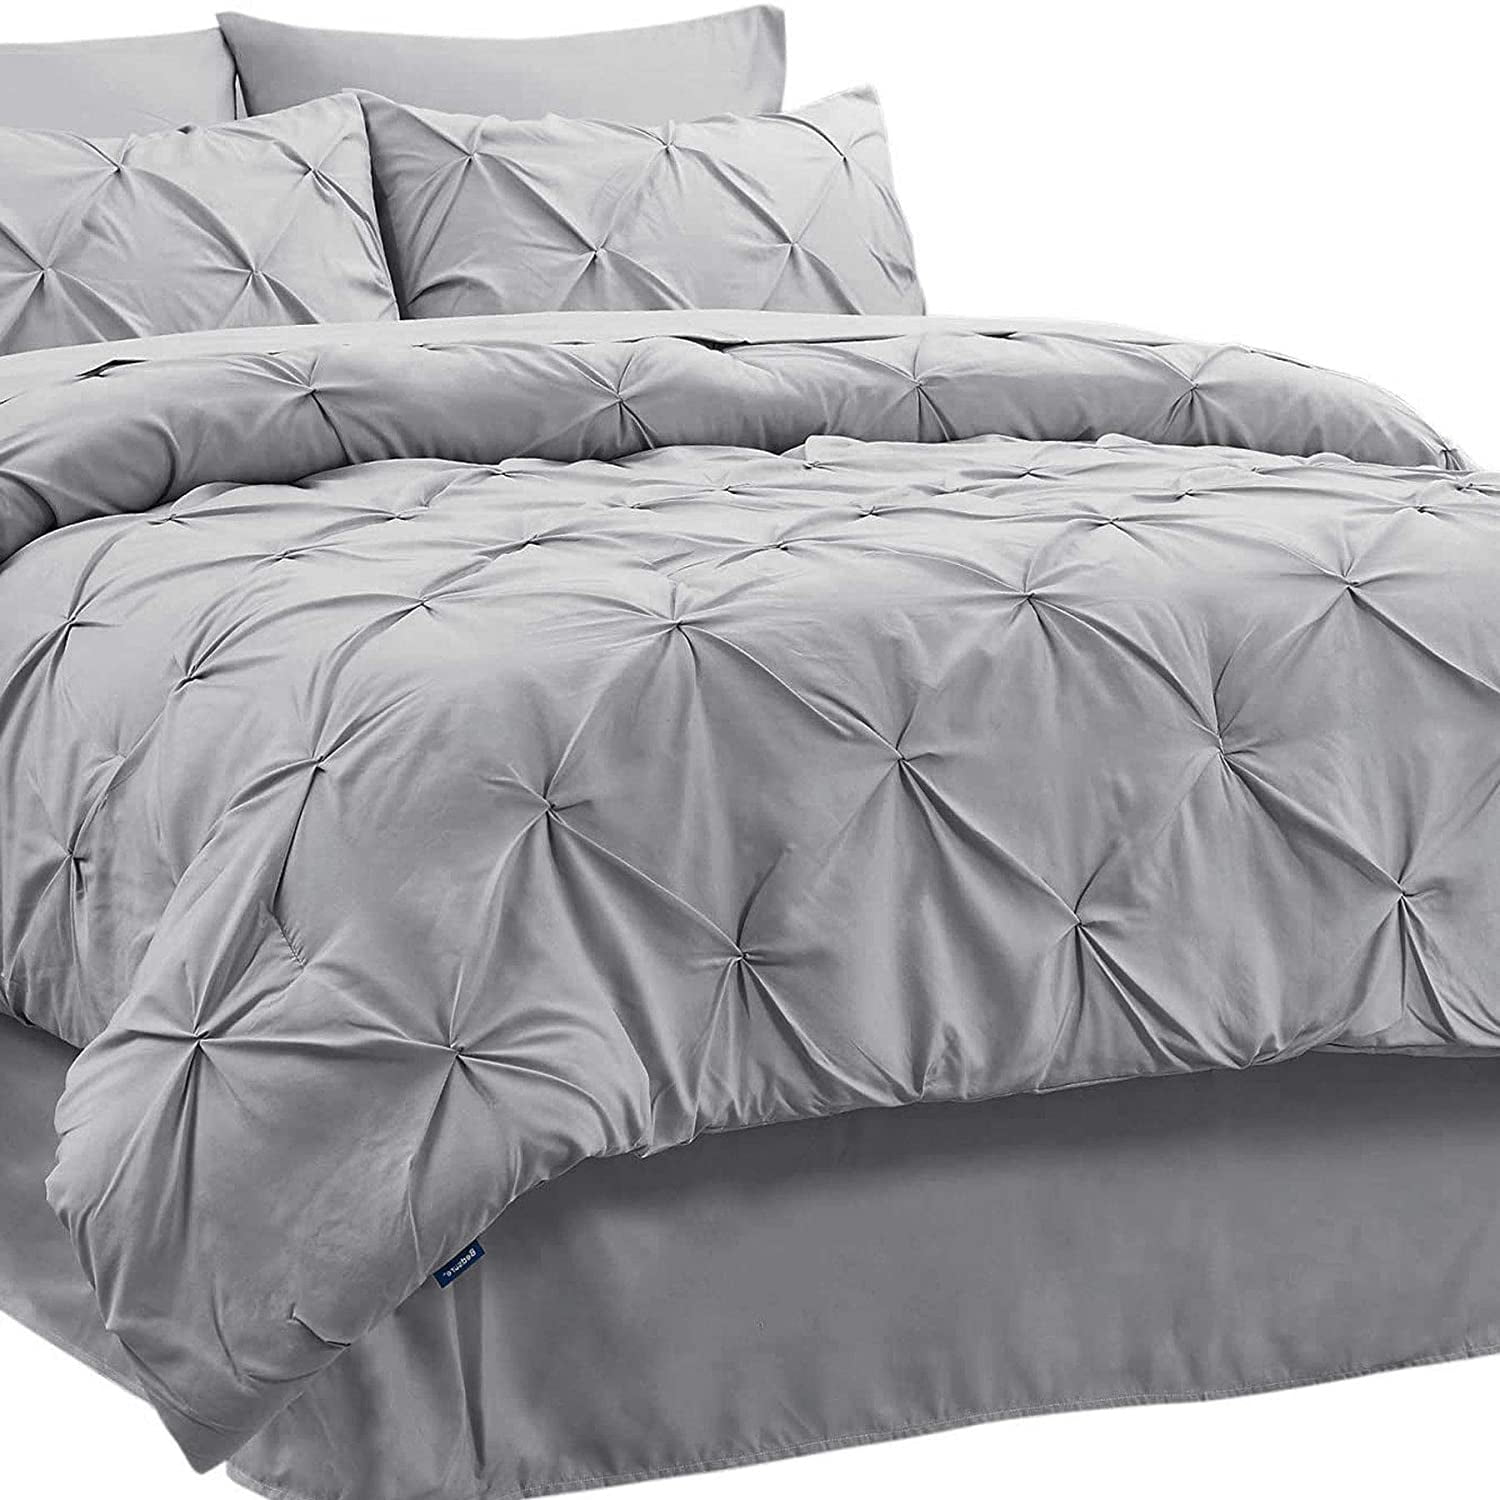 Grey Bedd Details about   Bedsure Bedding Comforter Sets Queen Comforter Bed in A Bag 8 Pieces 